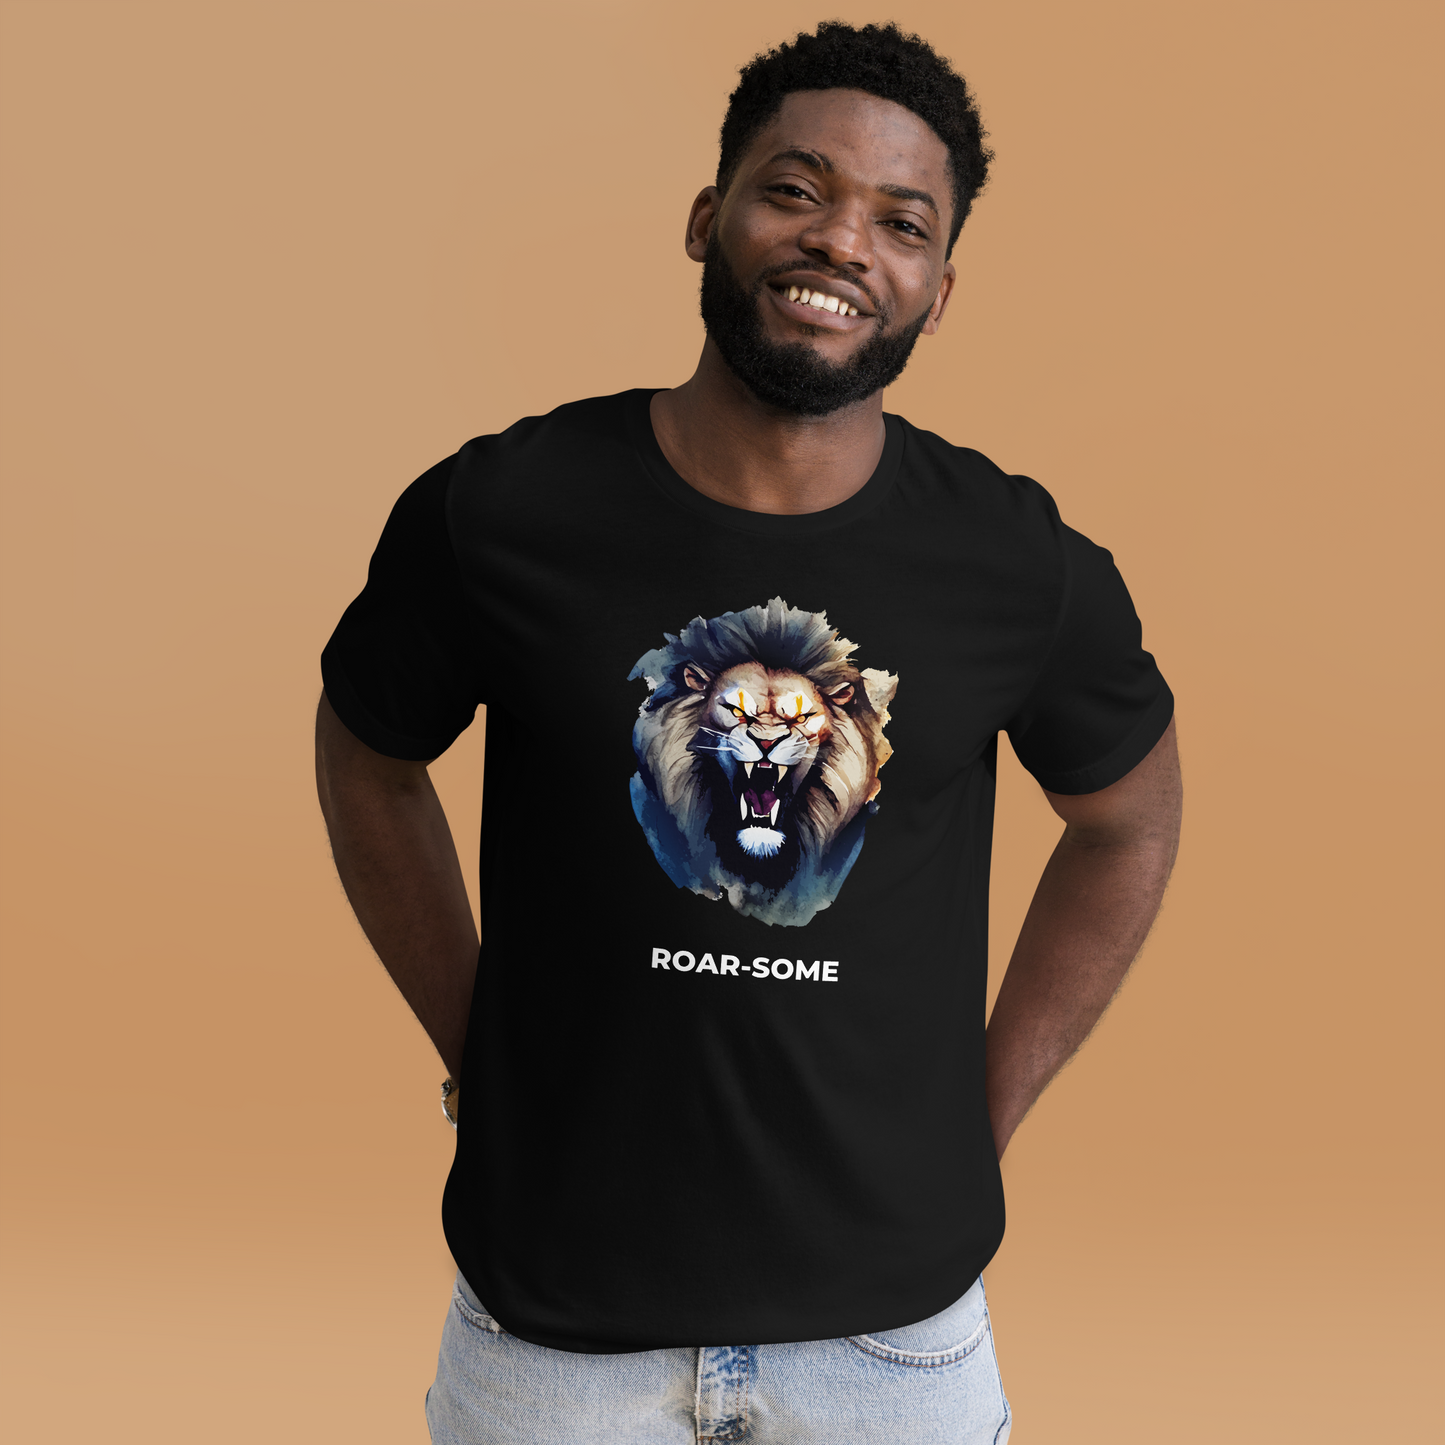 Man wearing a Black Premium Lion Tee featuring a Roar-Some graphic on the chest - Cool Graphic Lion Tees - Boozy Fox